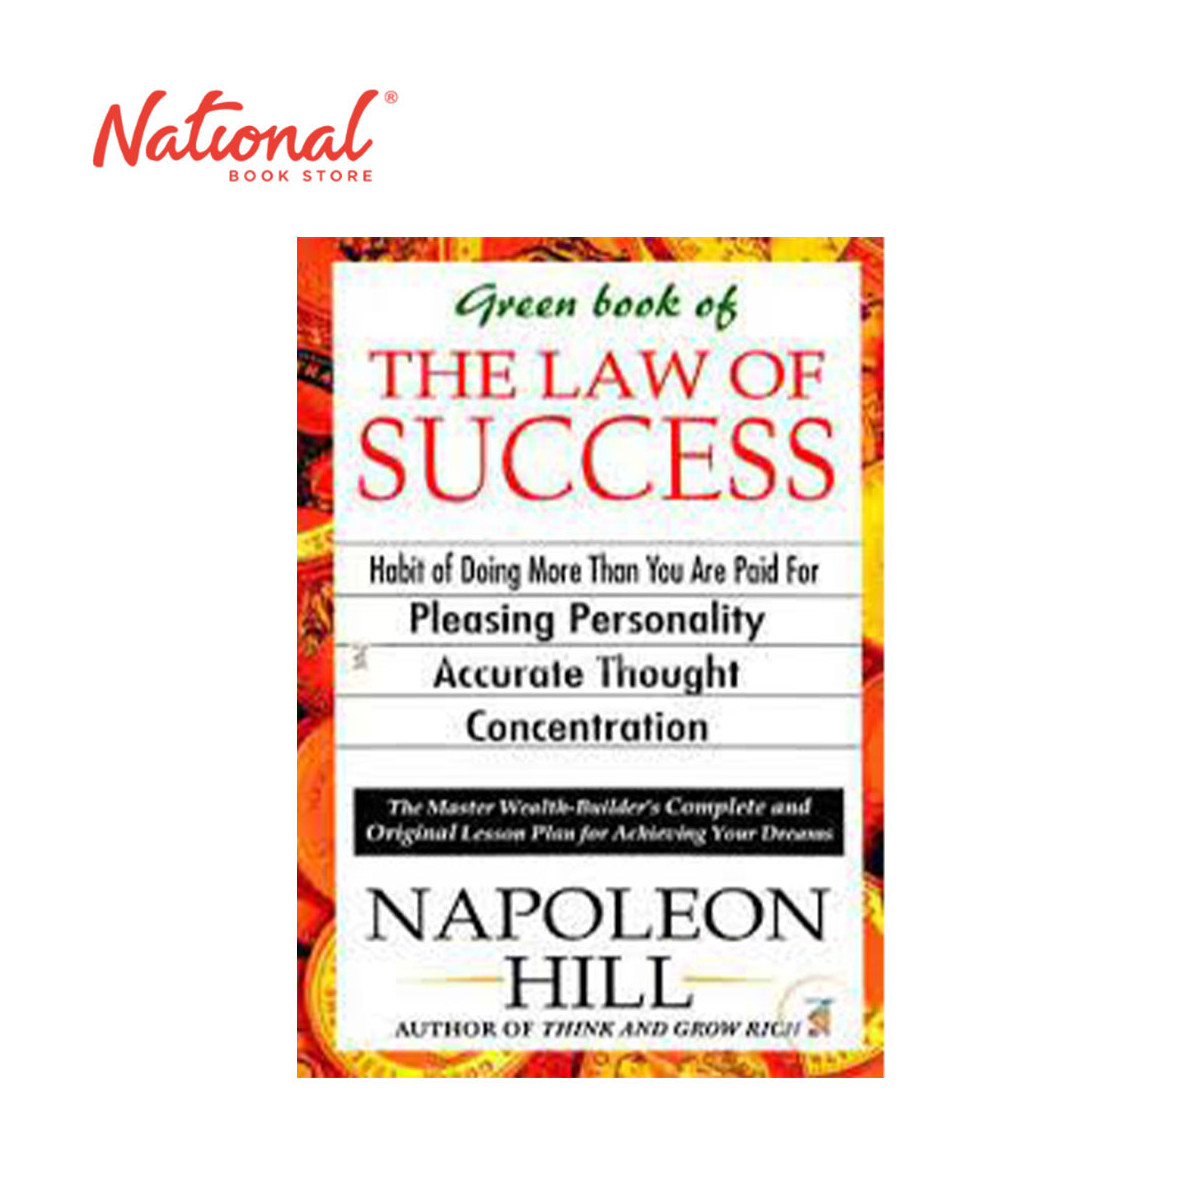 Green Book The Law Of Success by Napoleon Hill - Trade Paperback - Self-Help Books